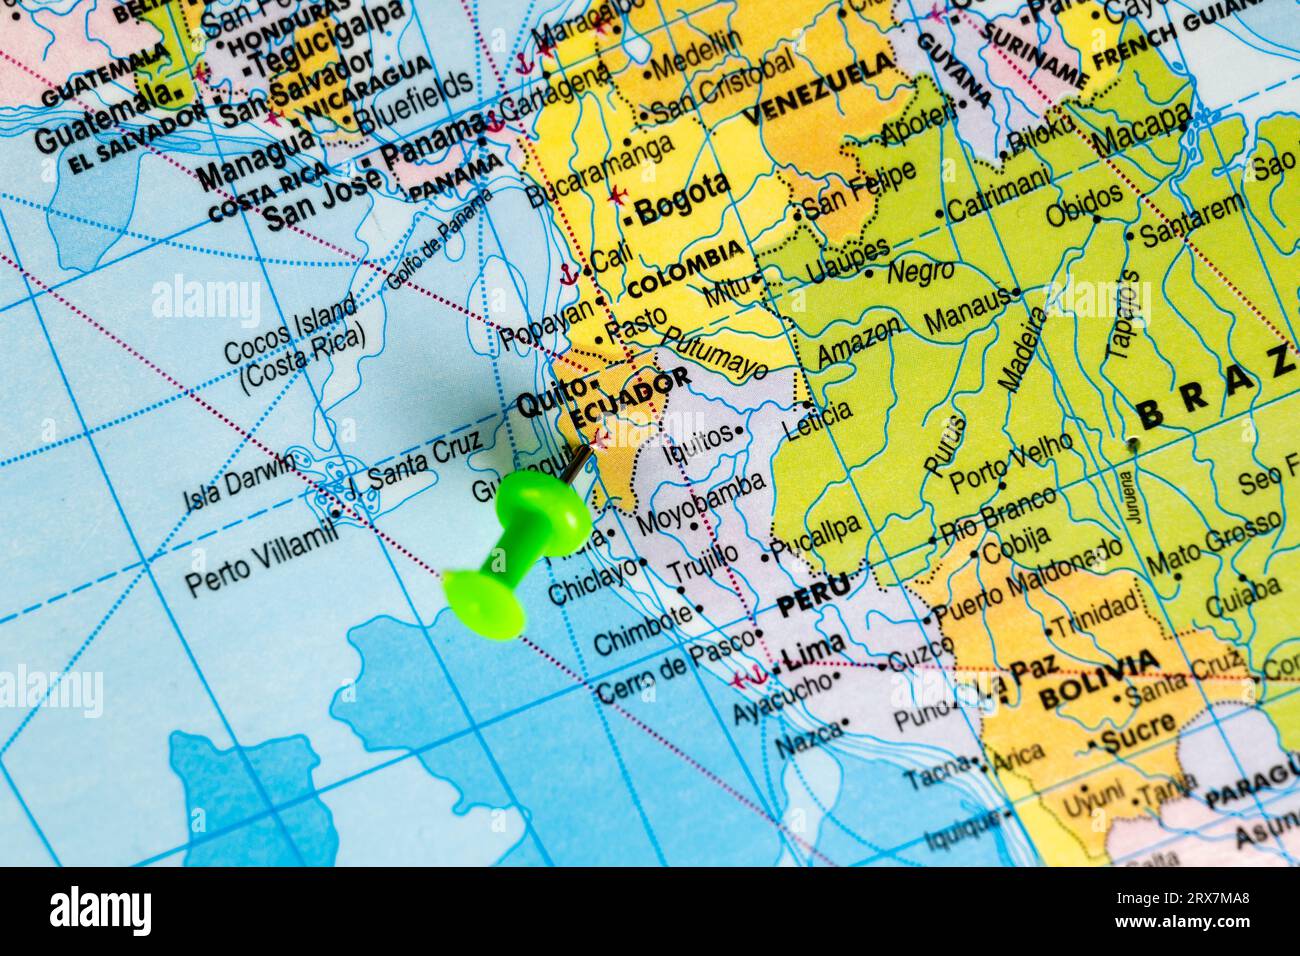 This stock image shows the location of Ecuador on a world map Stock Photo